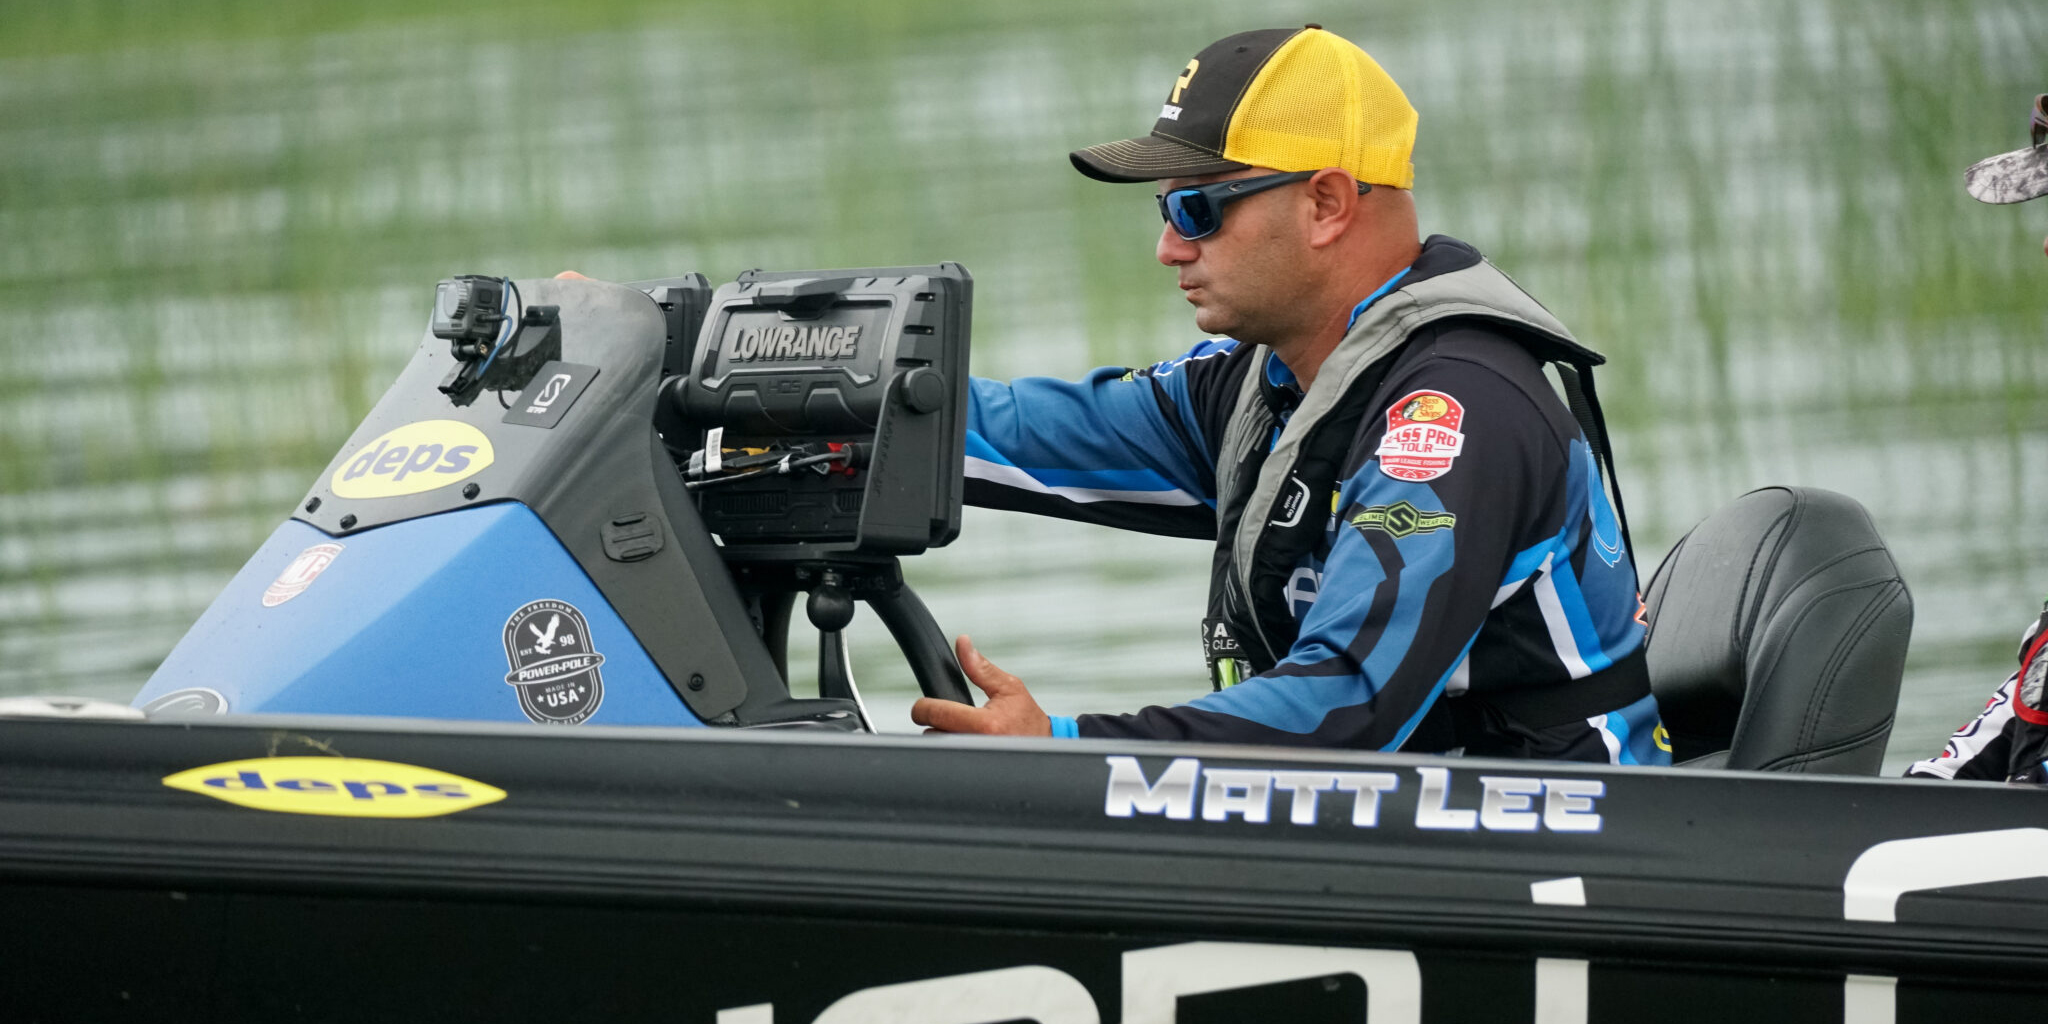 Matt Lee reflects on the 2023 Bass Pro Tour and looks ahead to 2024